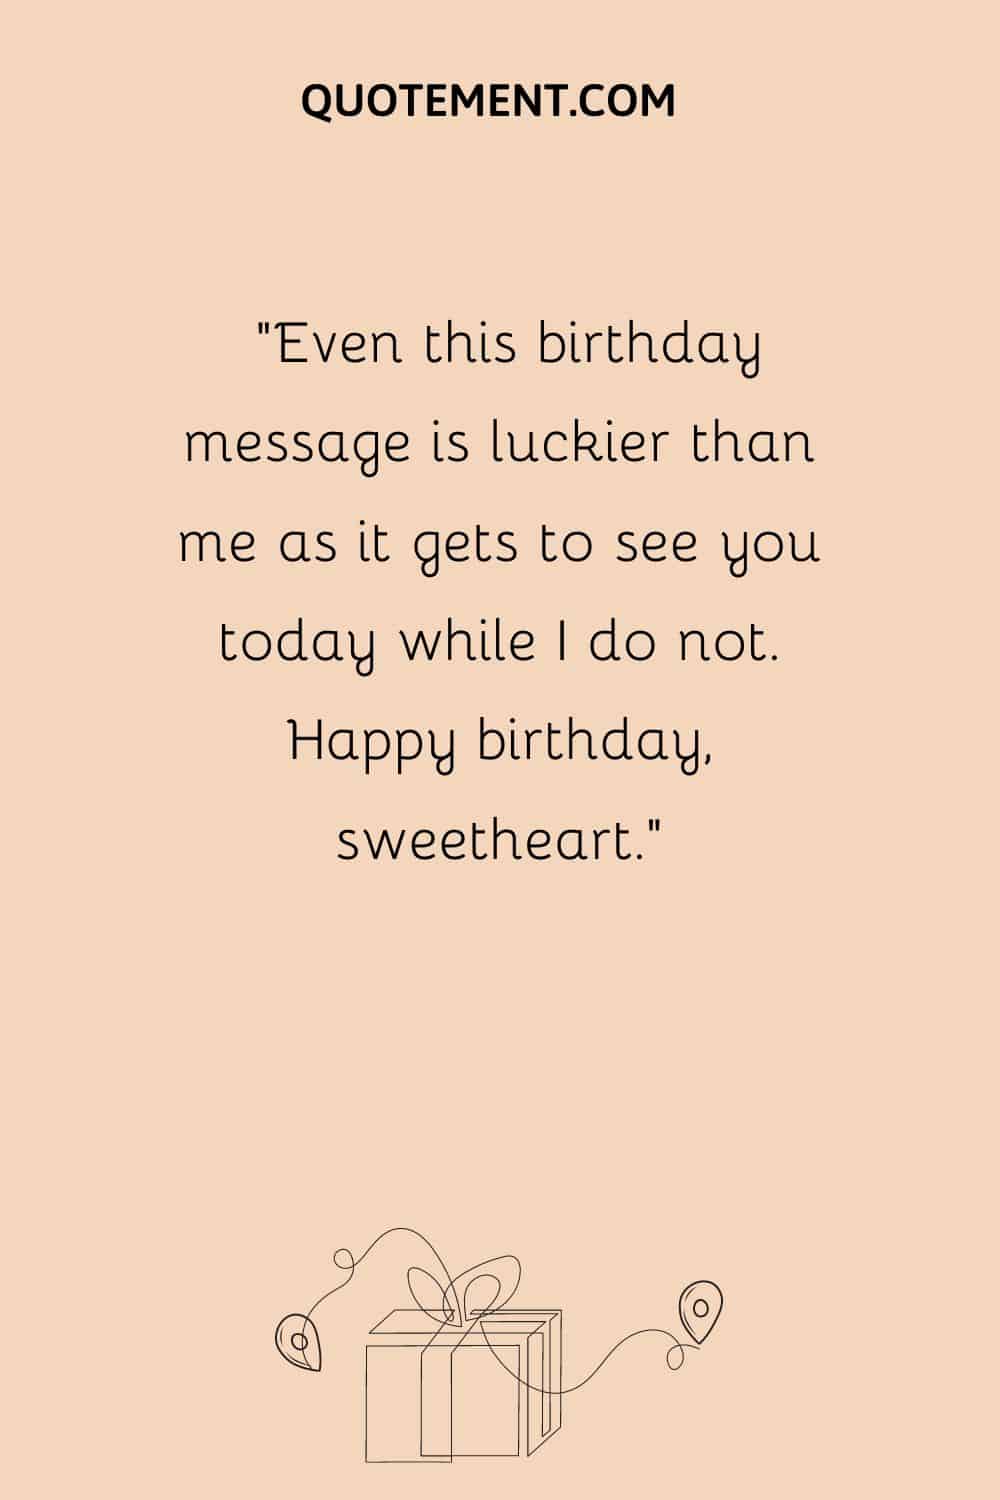 “Even this birthday message is luckier than me as it gets to see you today while I do not. Happy birthday, sweetheart.”